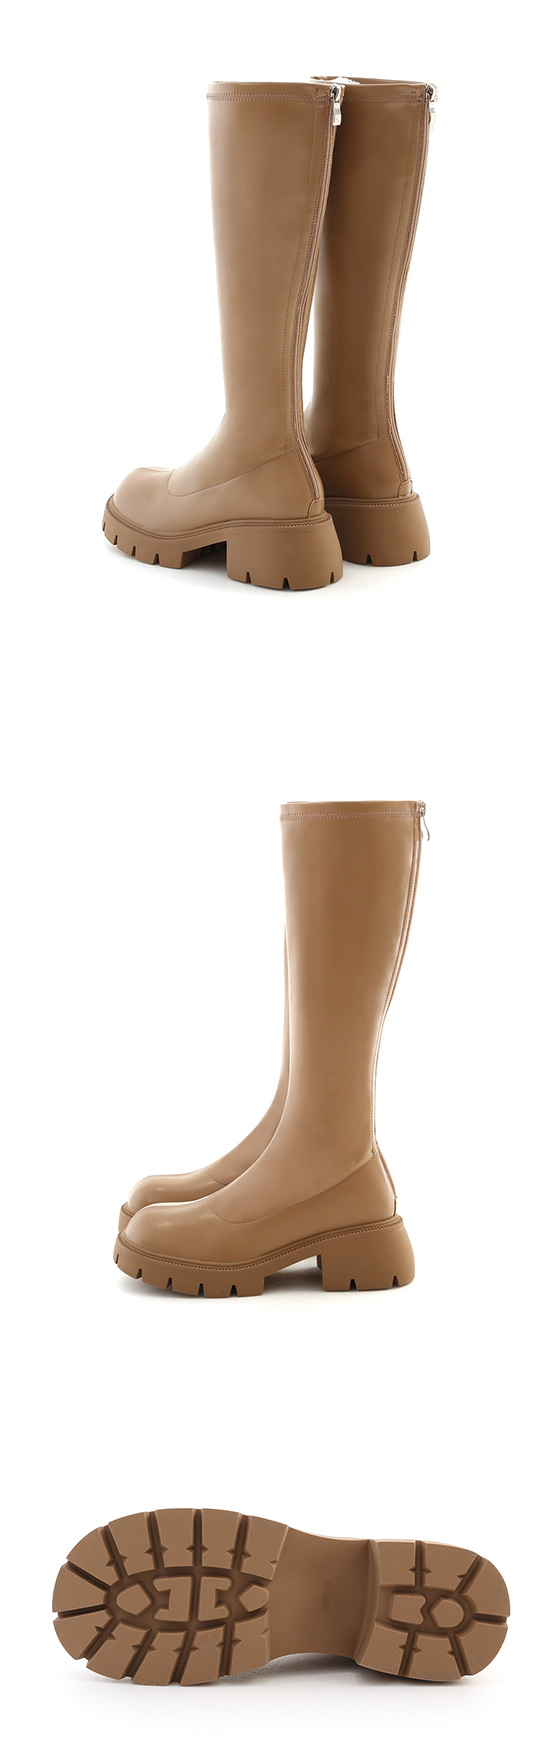 Round Toe Chunky Sole High Heeled Slimming Boots Beige